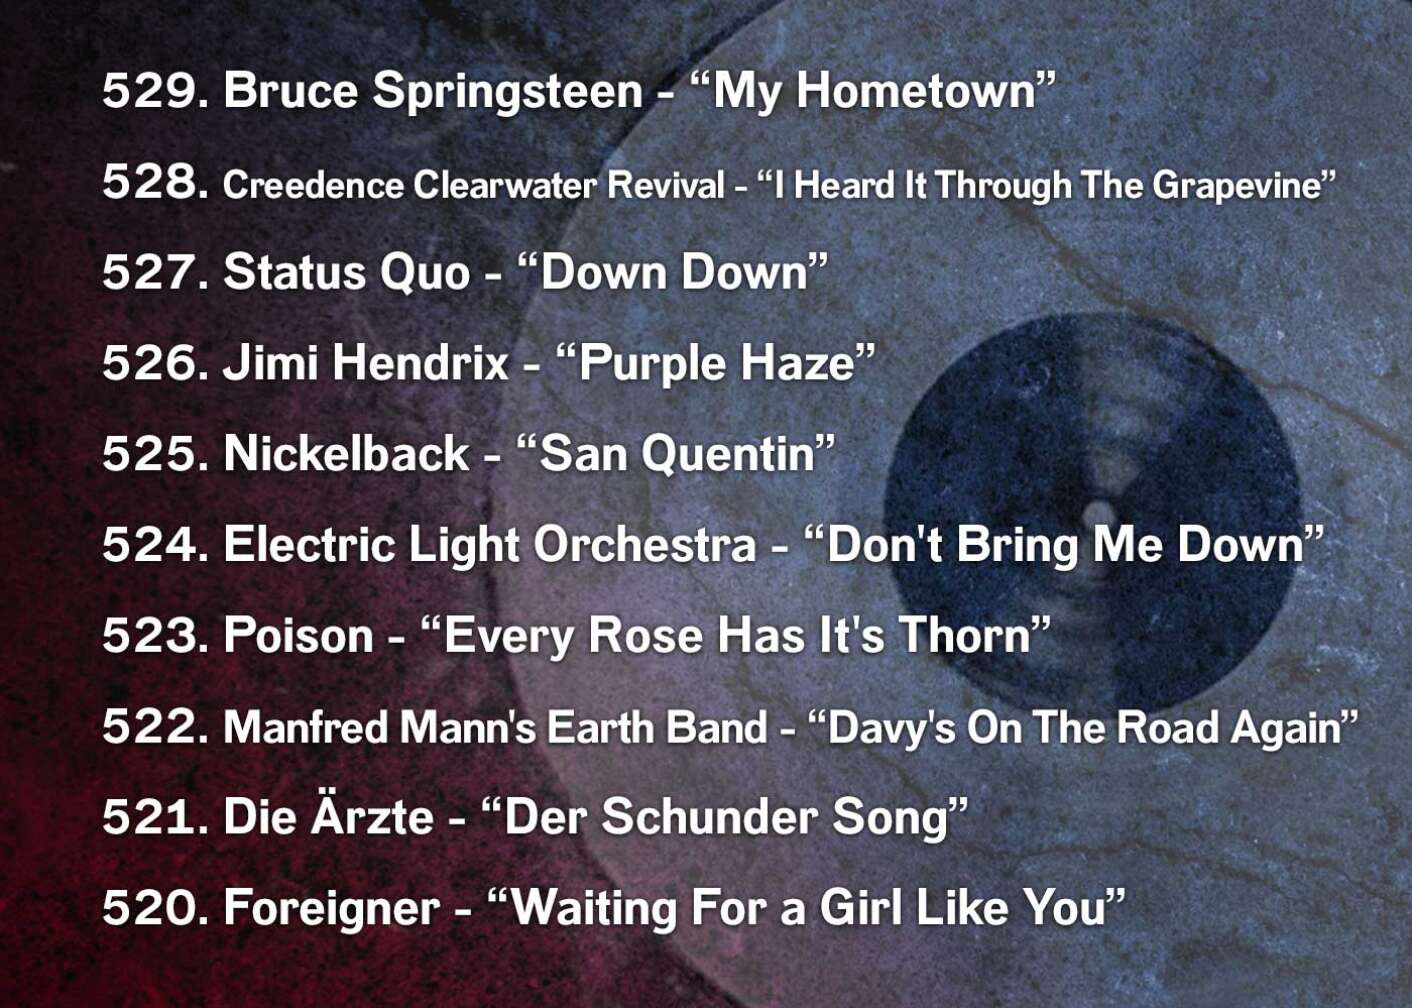 529. Bruce Springsteen - “My Hometown” 528. Creedence Clearwater Revival - “I Heard It Through The Grapevine” 527. Status Quo - “Down Down” 526. Jimi Hendrix - “Purple Haze” 525. Nickelback - “San Quentin” 524. Electric Light Orchestra - “Don't Bring Me Down” 523. Poison - “Every Rose Has It's Thorn” 522. Manfred Mann's Earth Band - “Davy's On The Road Again” 521. Die Ärzte - “Der Schunder Song” 520. Foreigner - “Waiting For a Girl Like You”